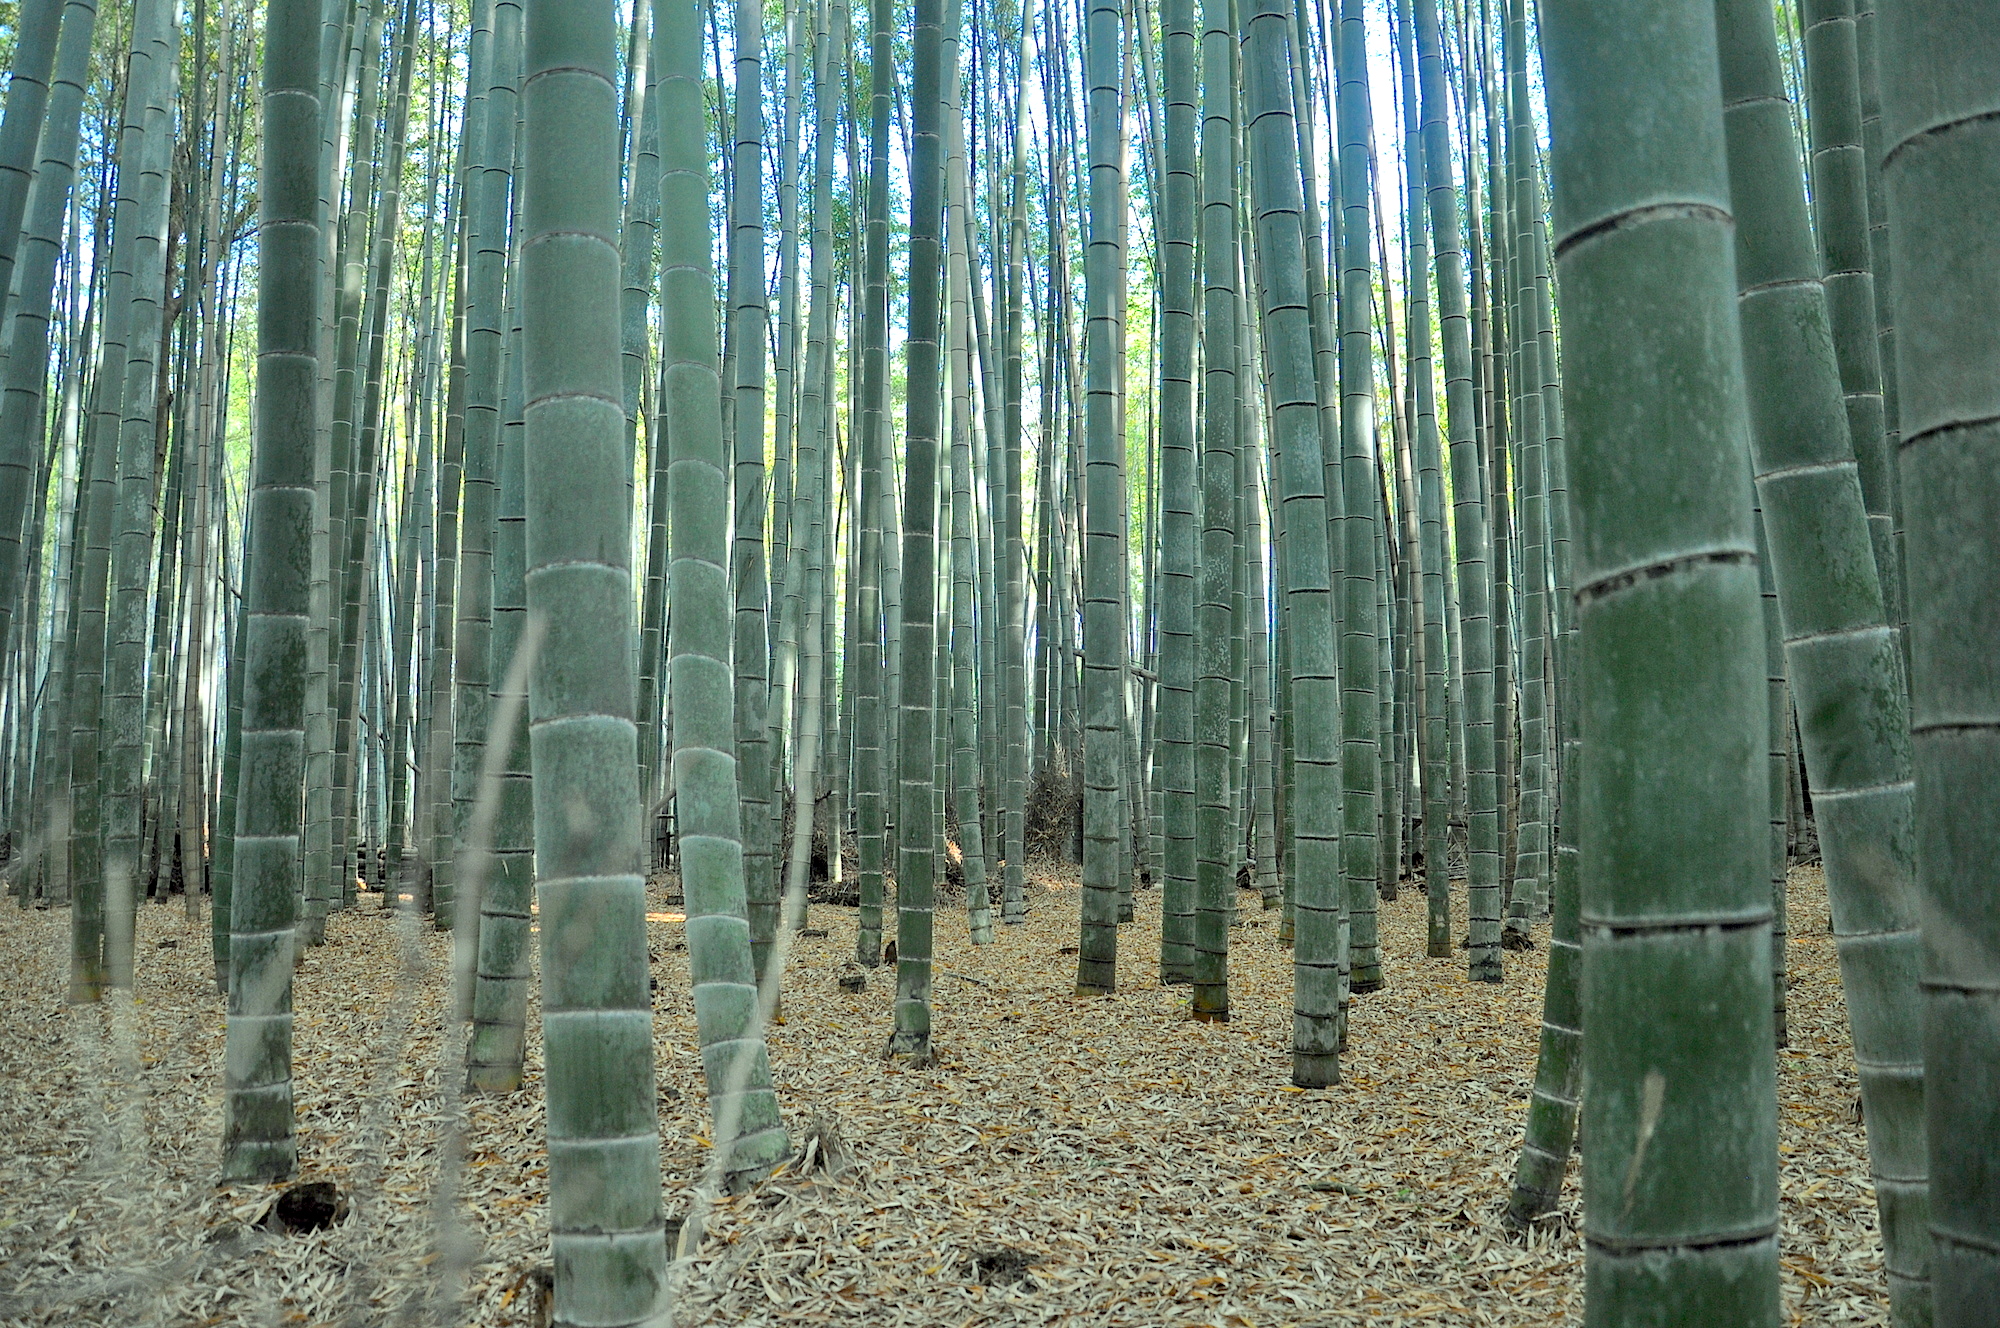 Sagano Bamboo Forest in Kyoto: One of world's prettiest groves | CNN ...